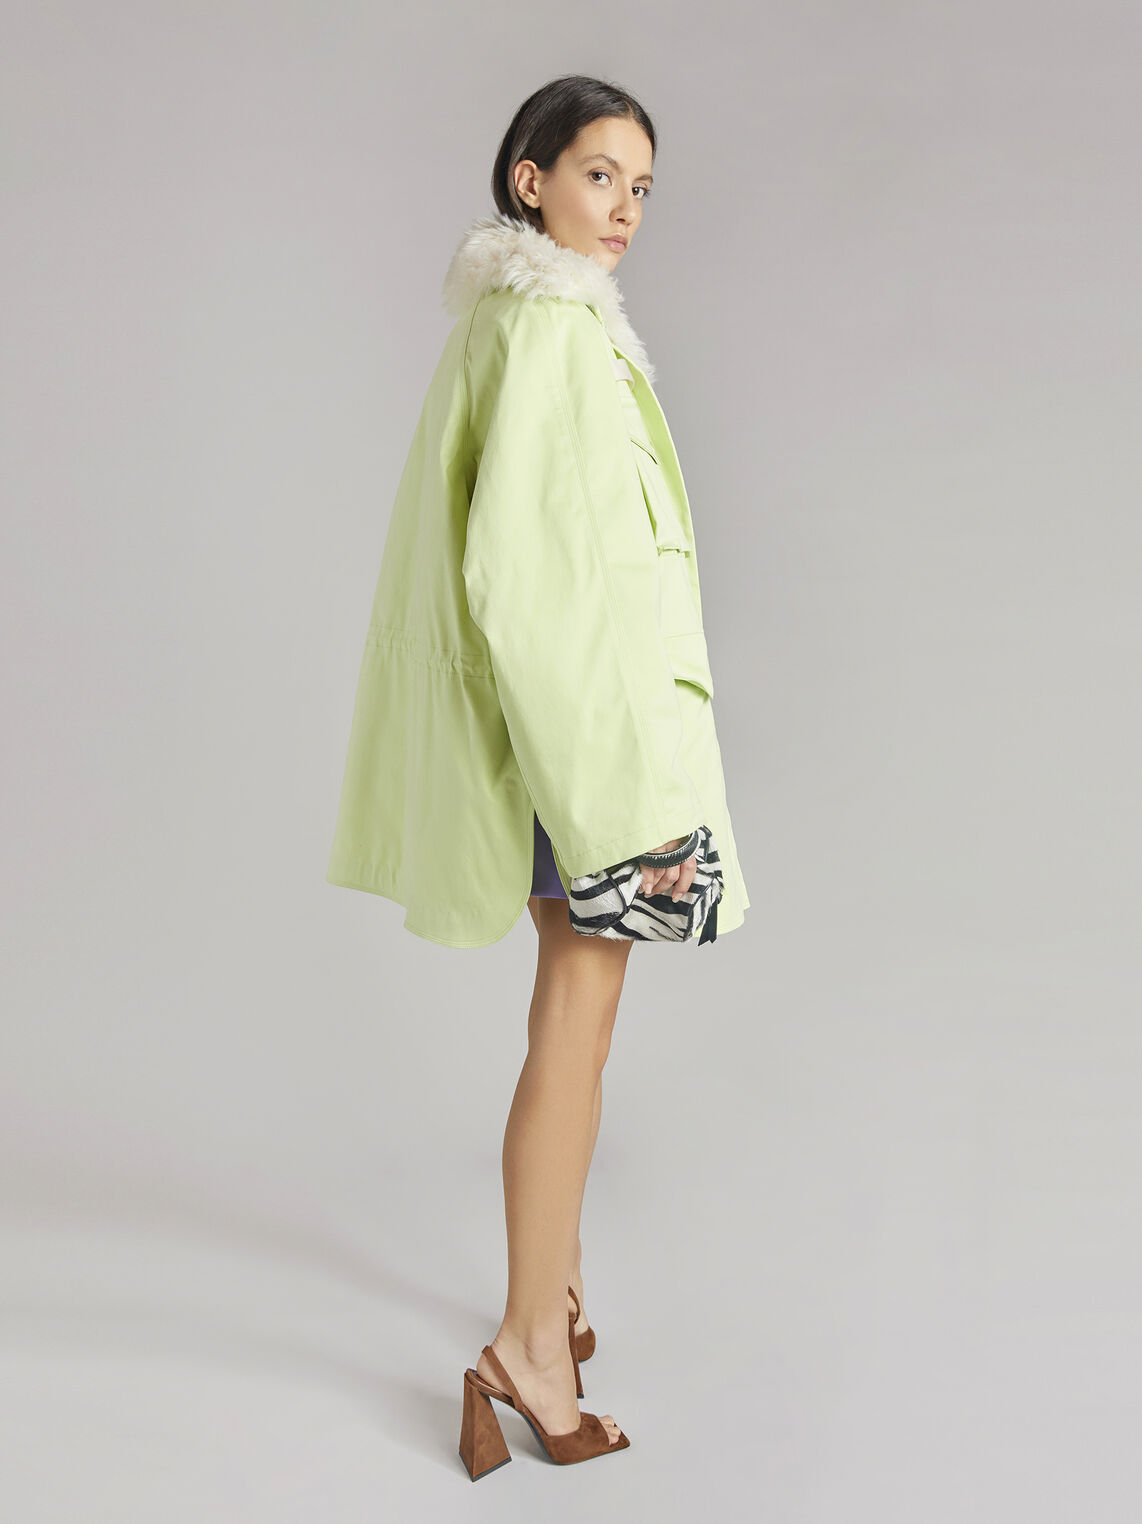 THE ATTICO "Janet" pale yellow field jacket 3